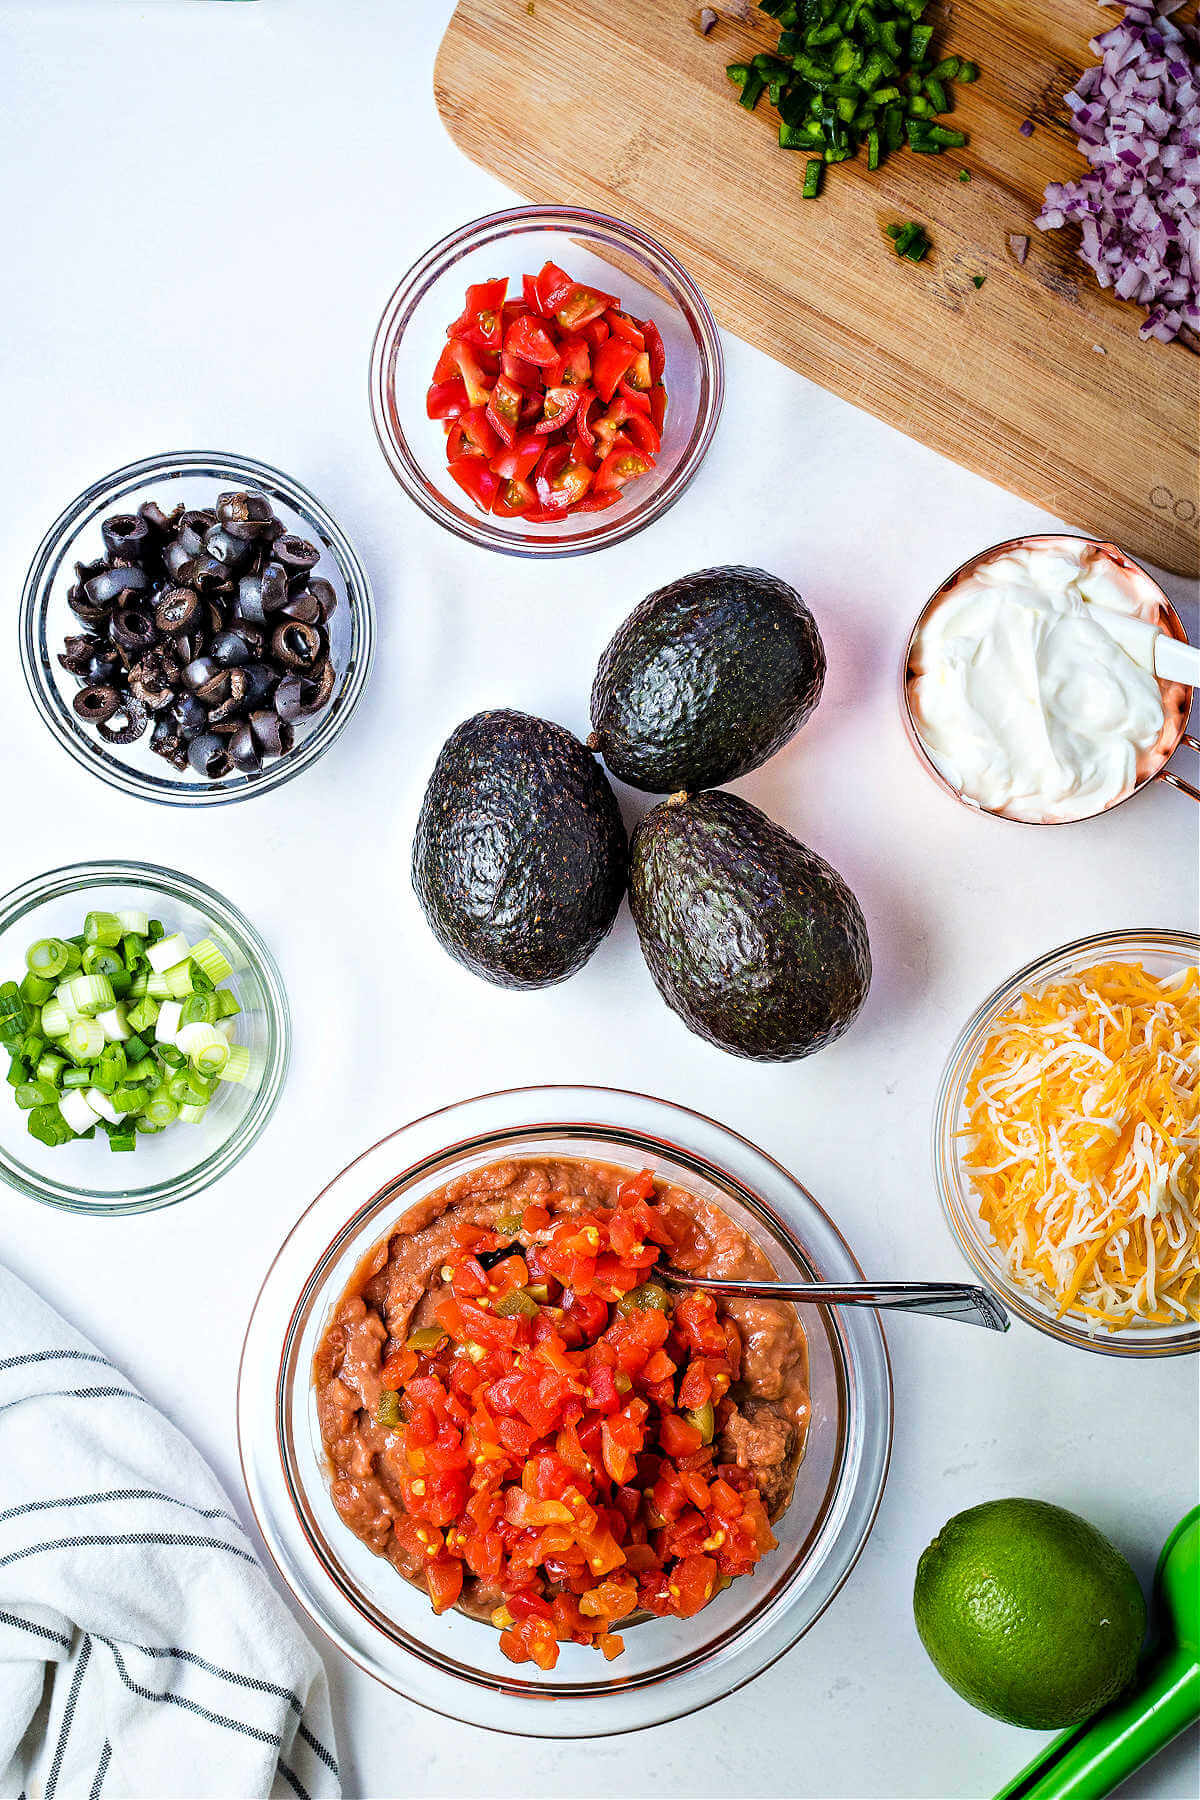 ingredients for layered taco dip on a table, including avocados, olives, tomatoes, cheese, and refried beans.